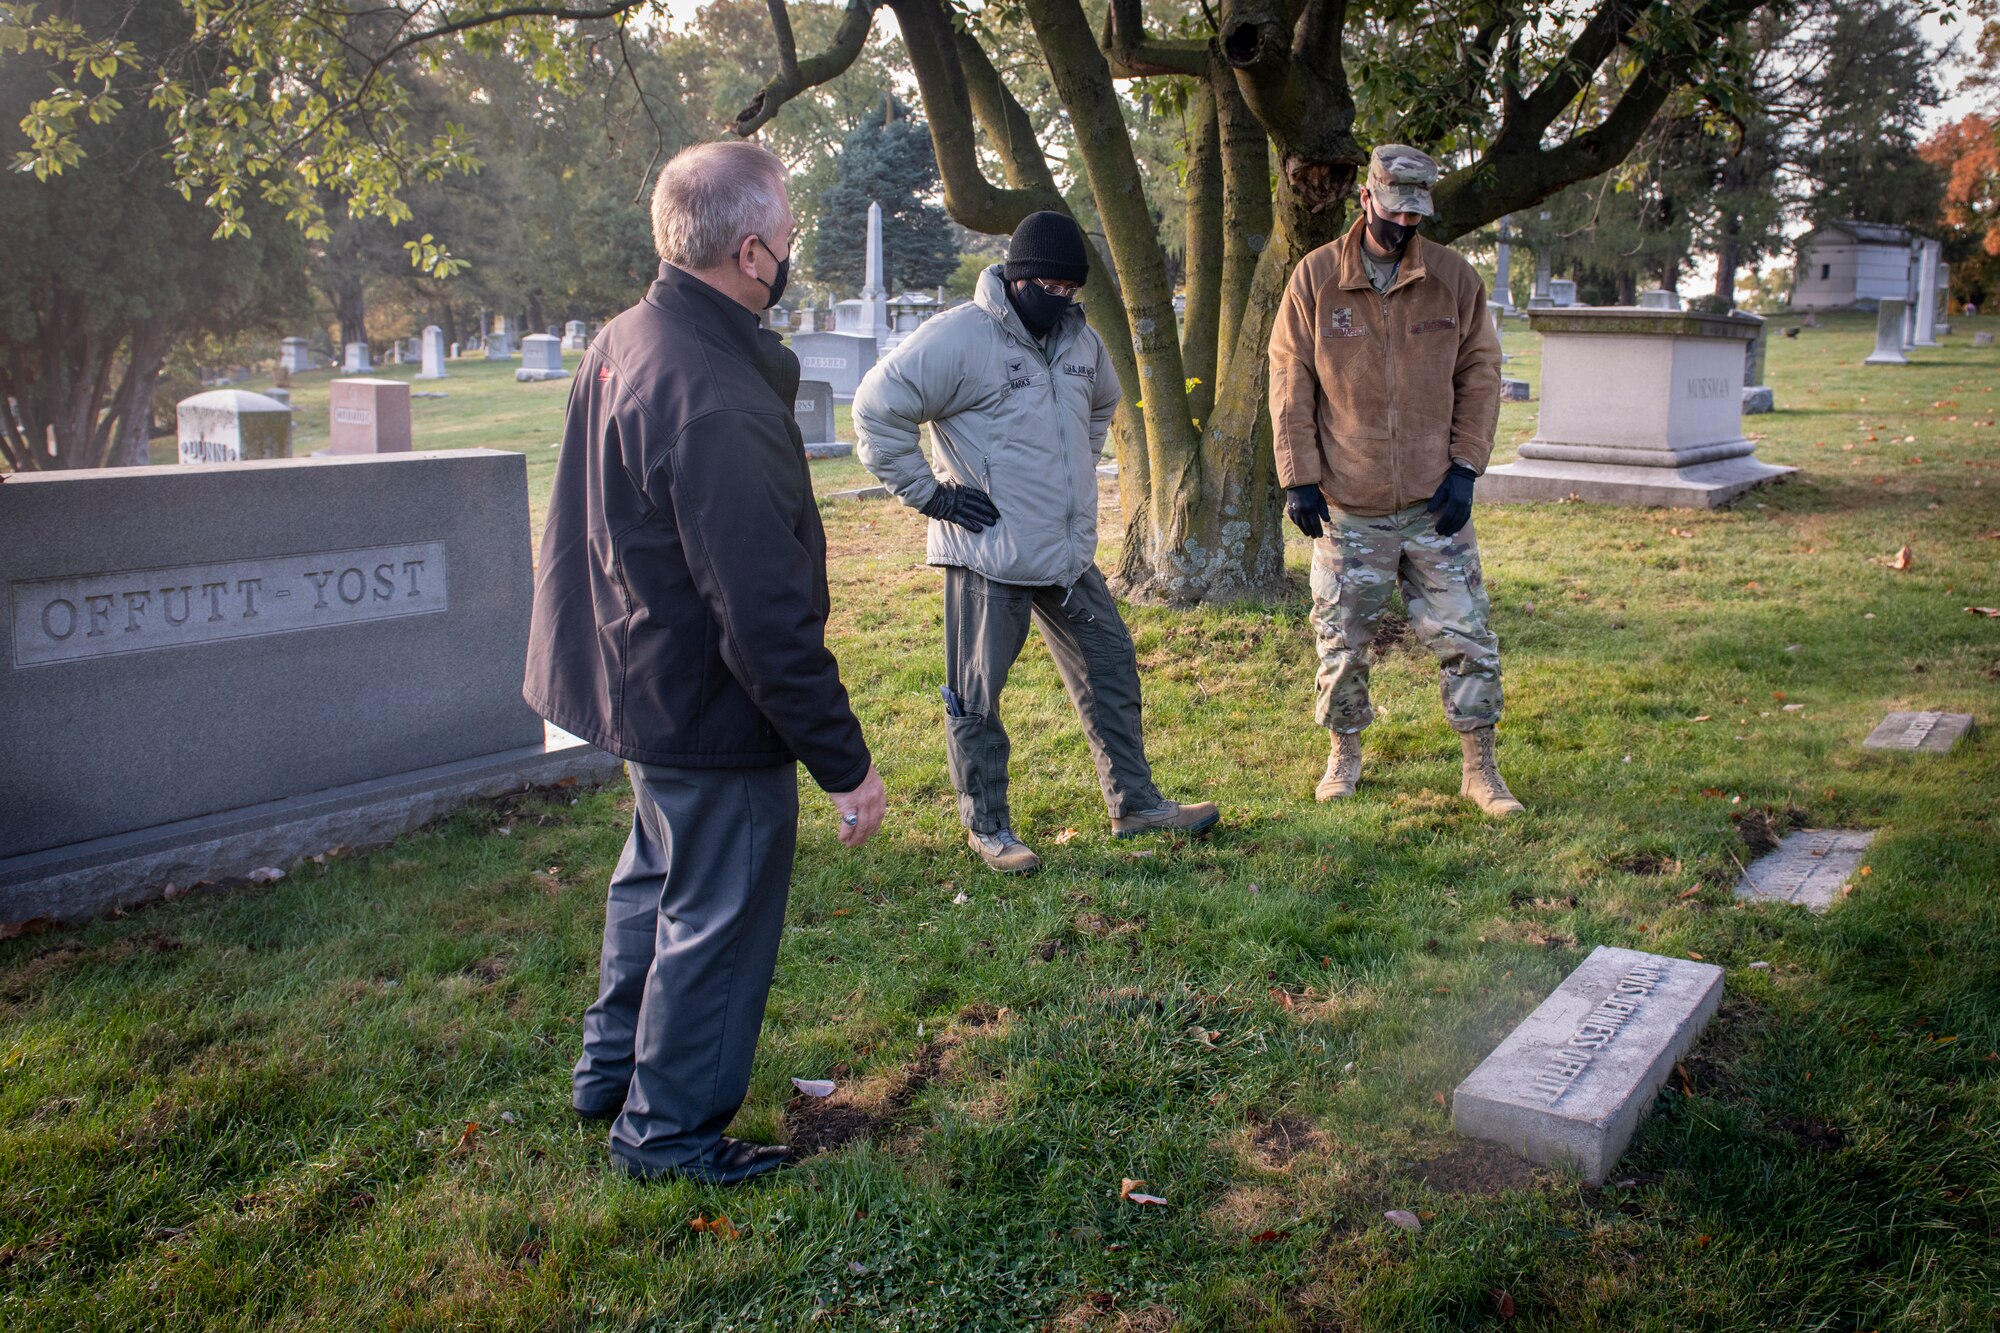 Two service members and a civilian stand at a grave site.